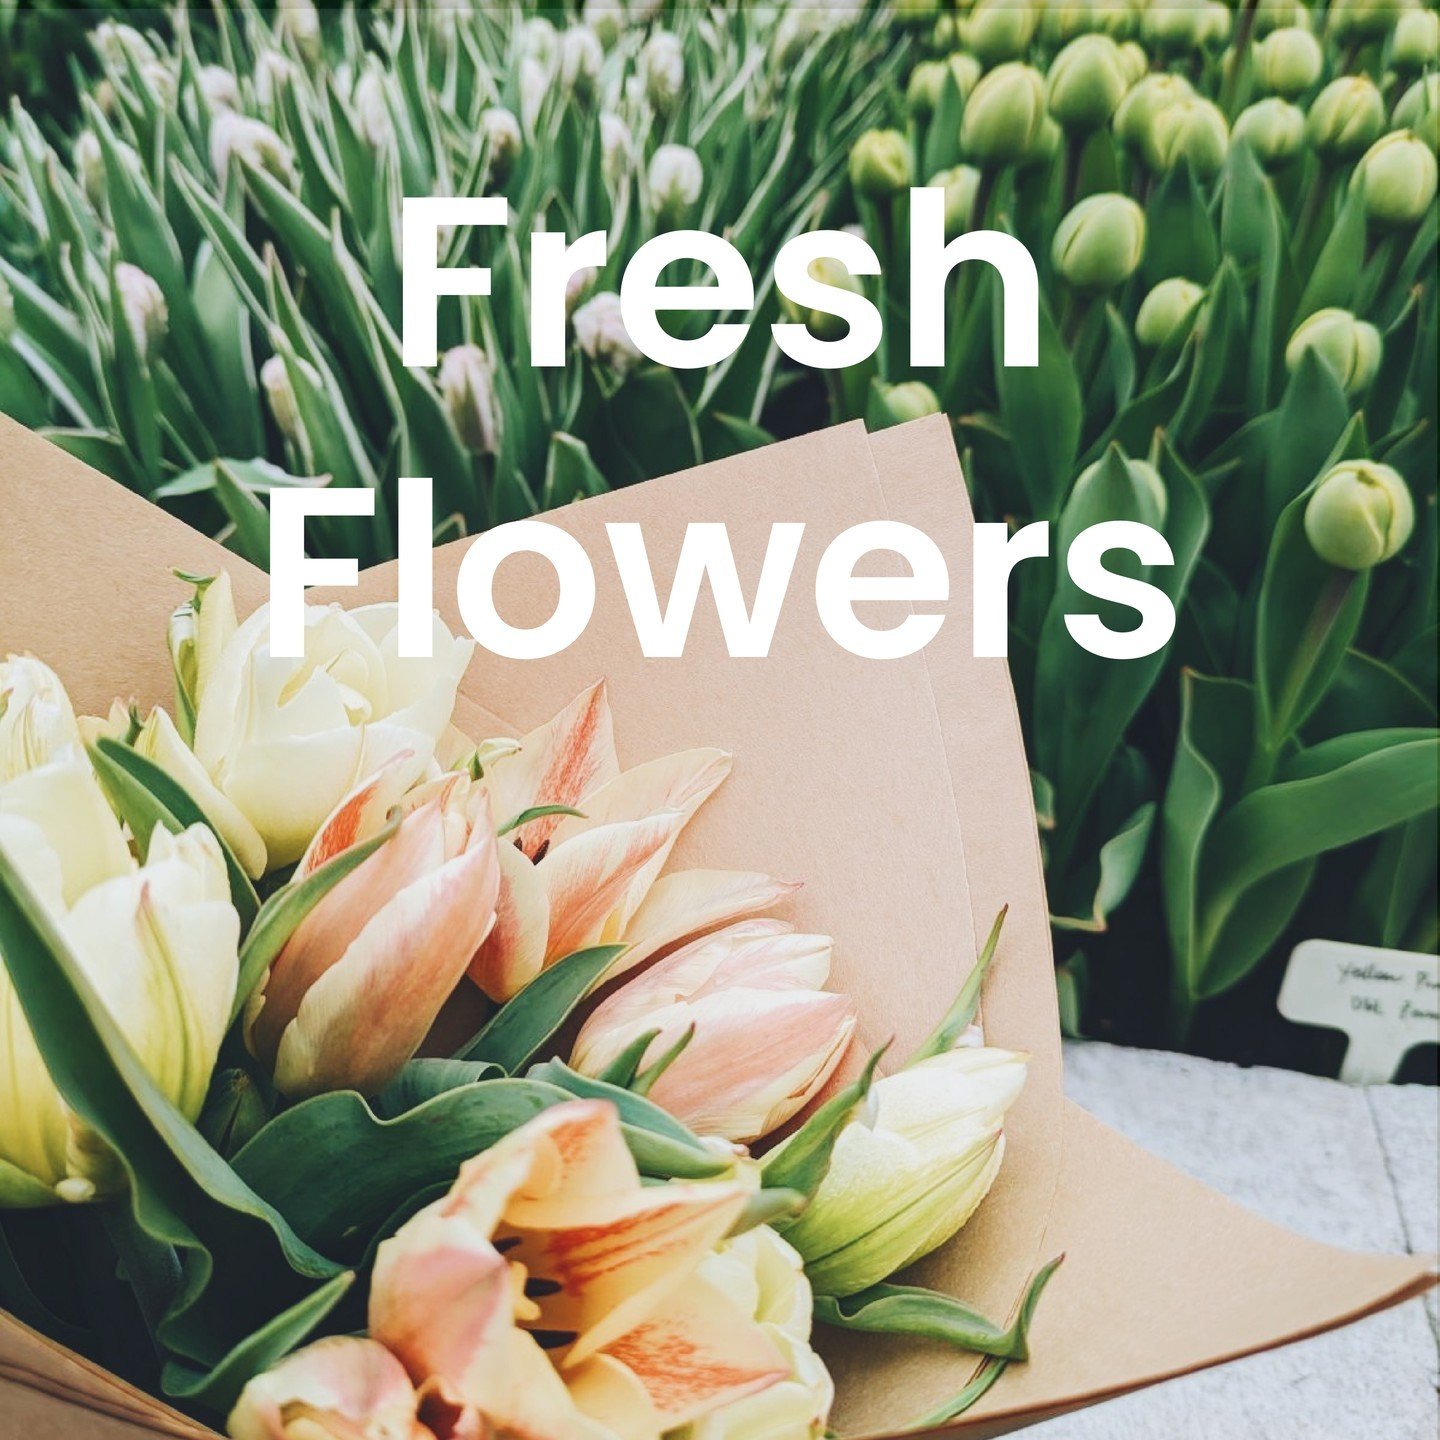 Starting Tuesday, May 7th we will be selling fresh local flowers 😊🌷Just in time for Mother's Day! Offerings will change weekly, so be sure to stop in when we're open to fill your home with blooms. ⁠
⁠
#relishmuskoka #local #supportlocal